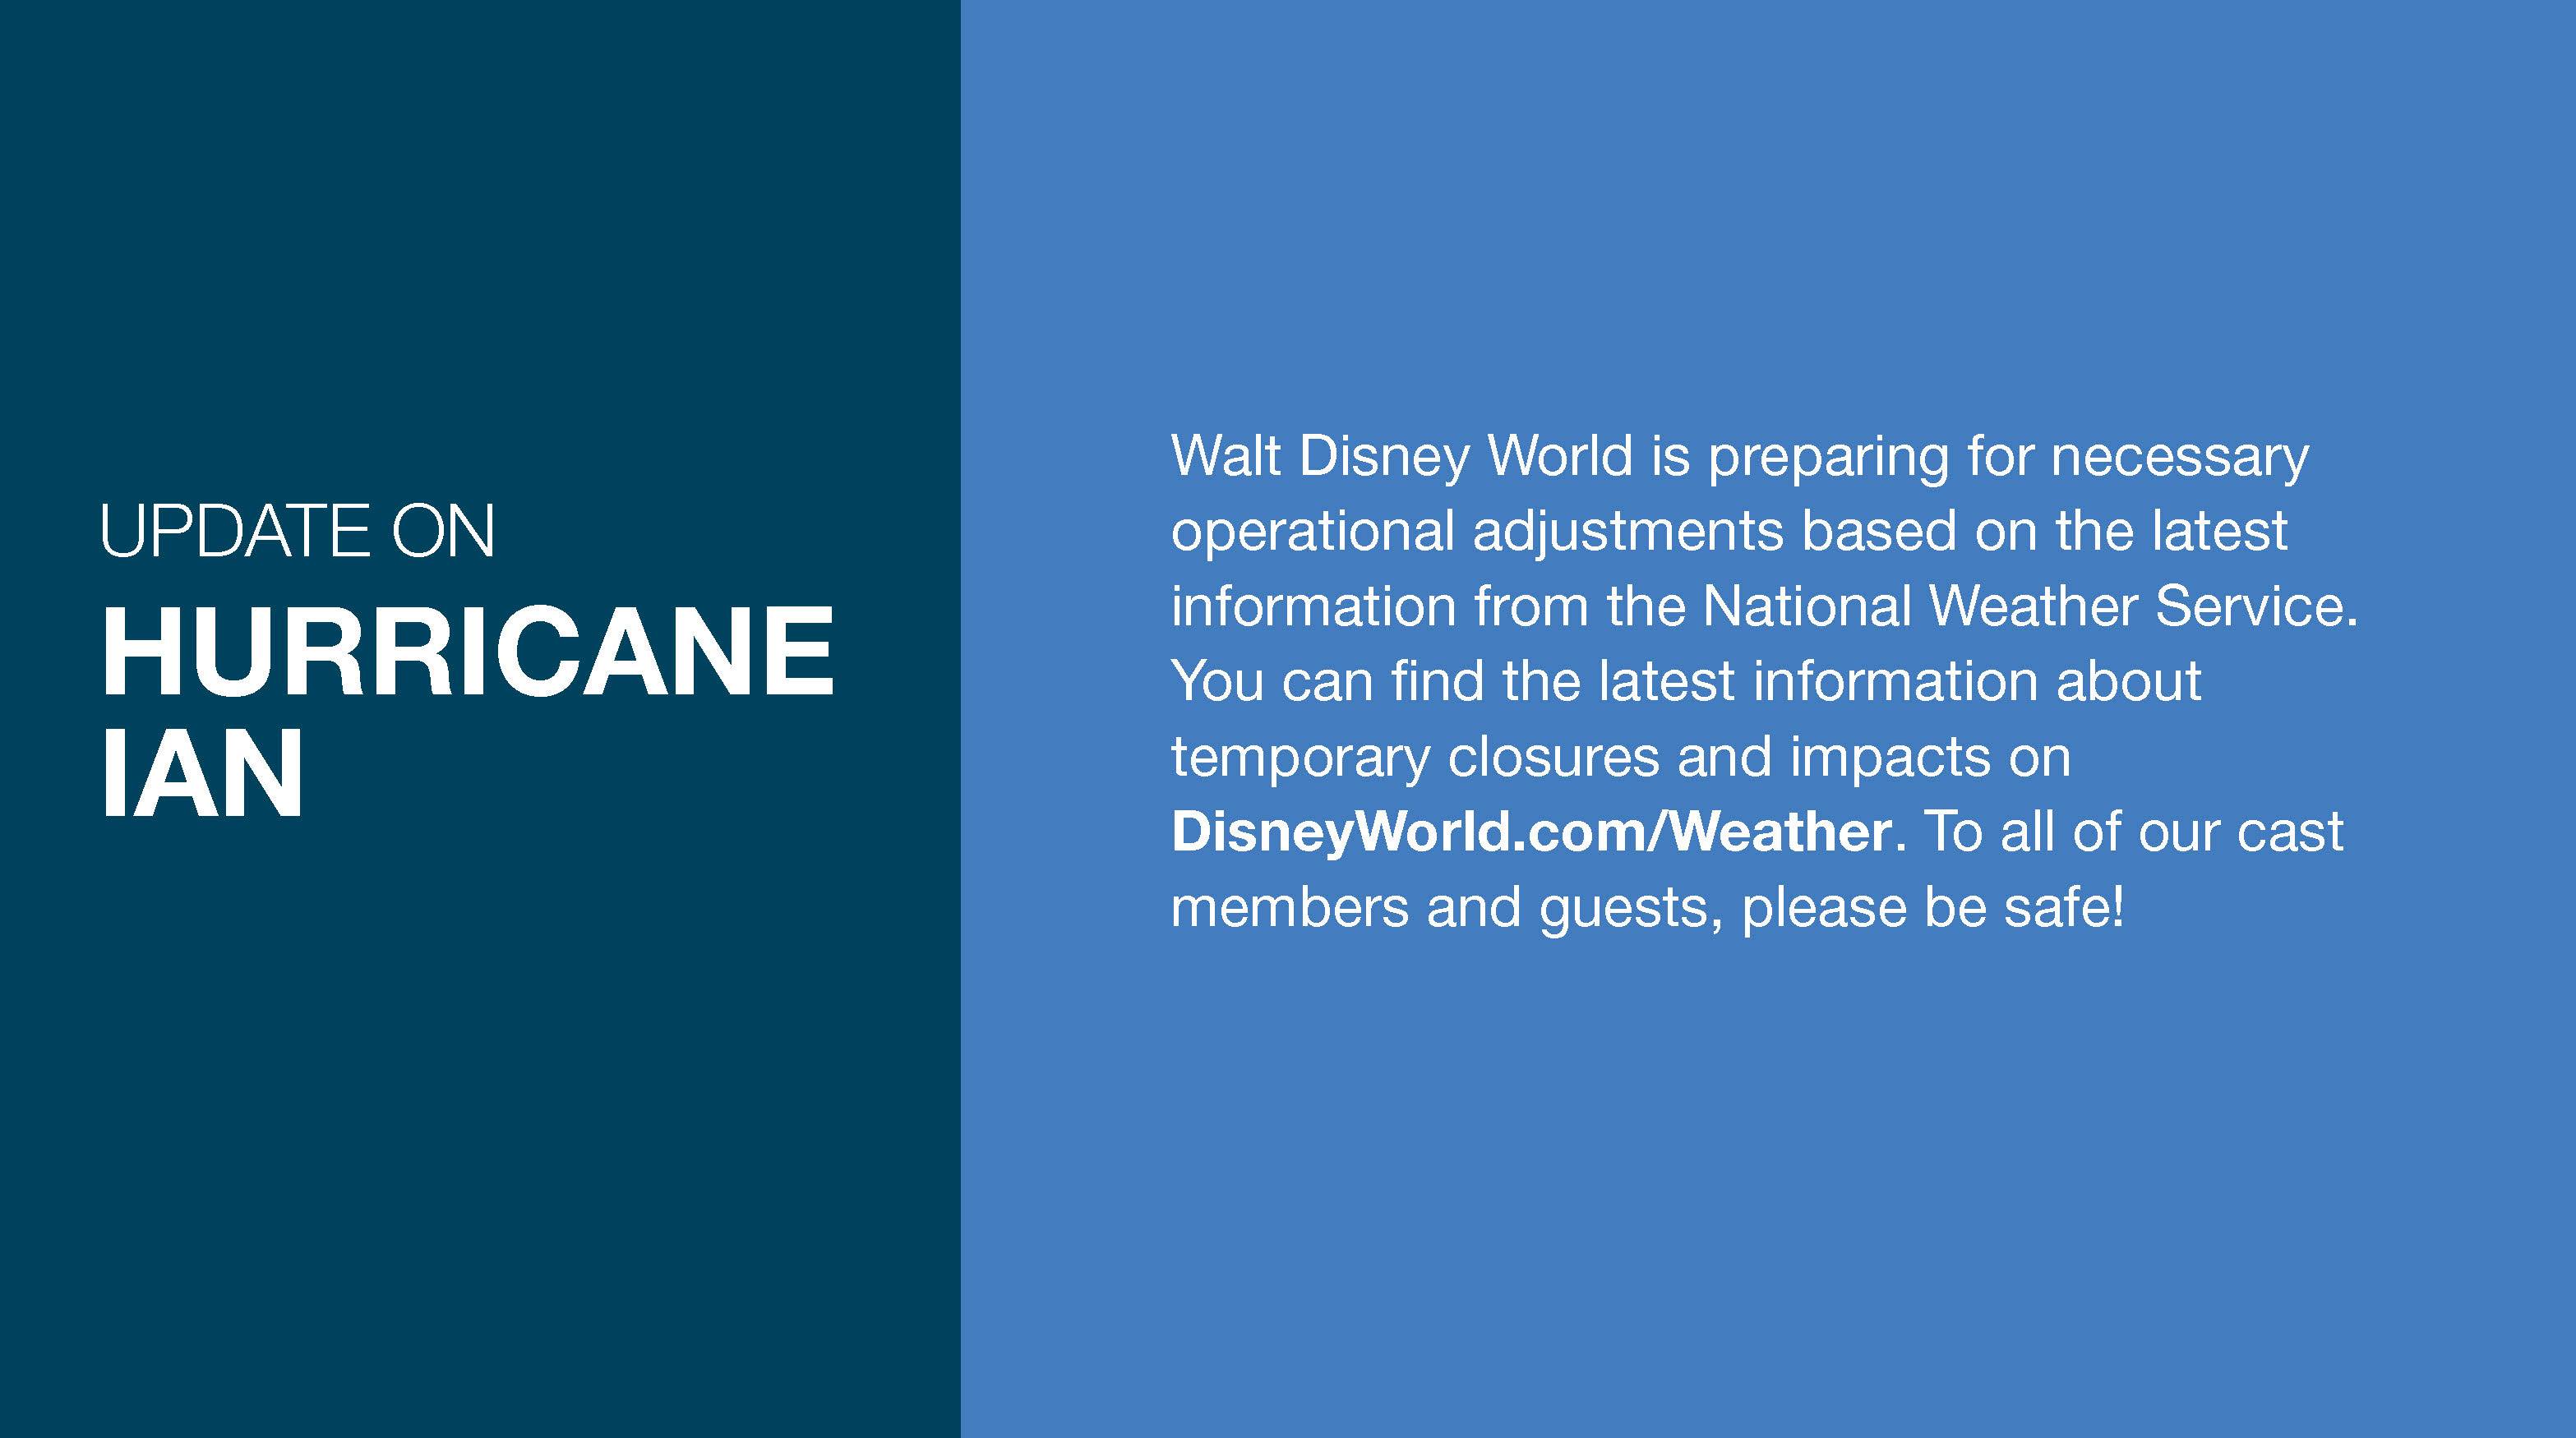 Disney issues first public statement on Hurricane Ian and impacts to Walt Disney World